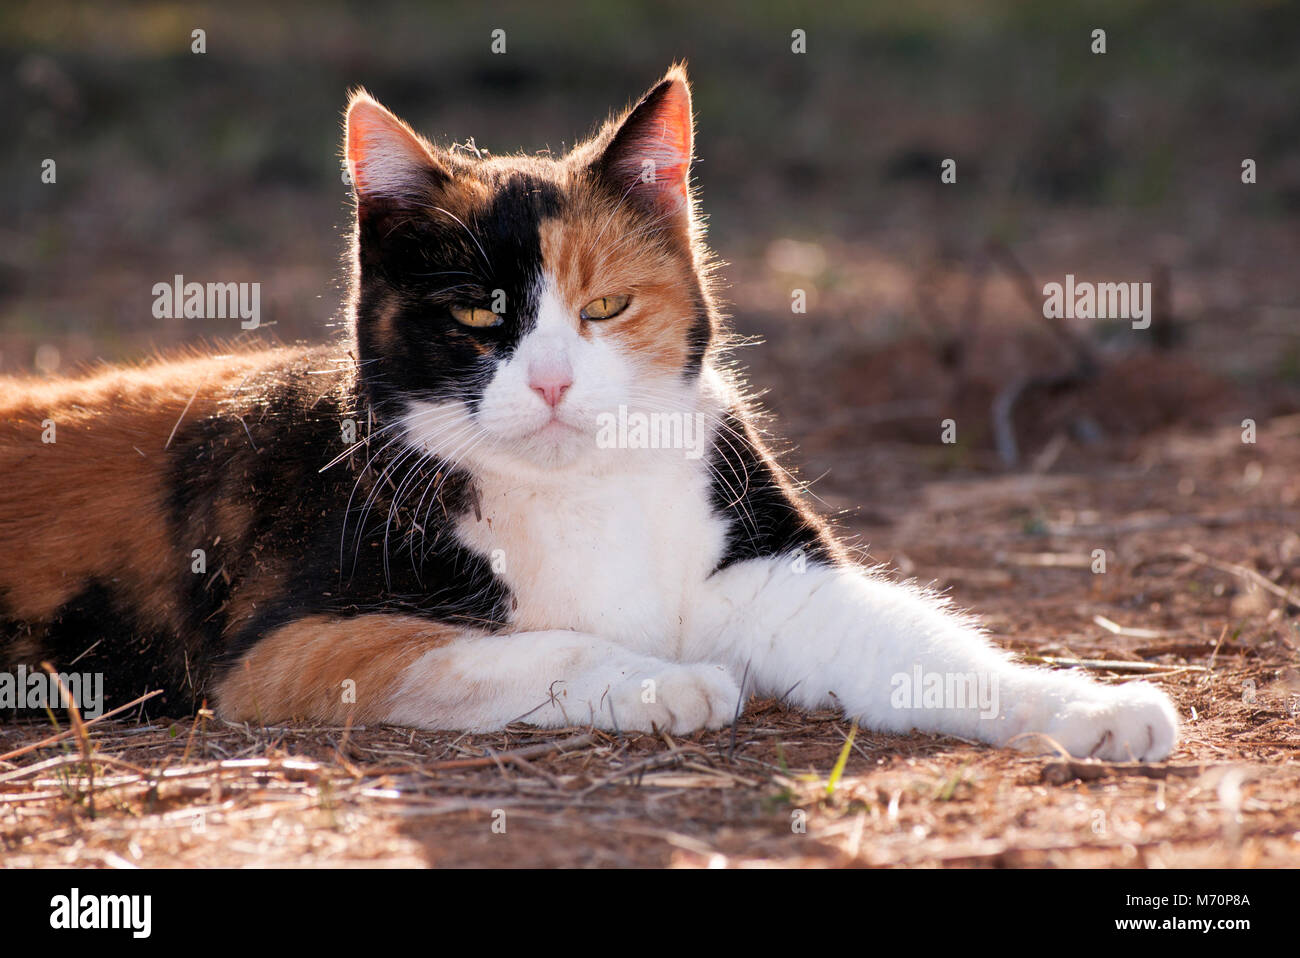 Calico cat back lit by evening sun, resting on the ground Stock Photo